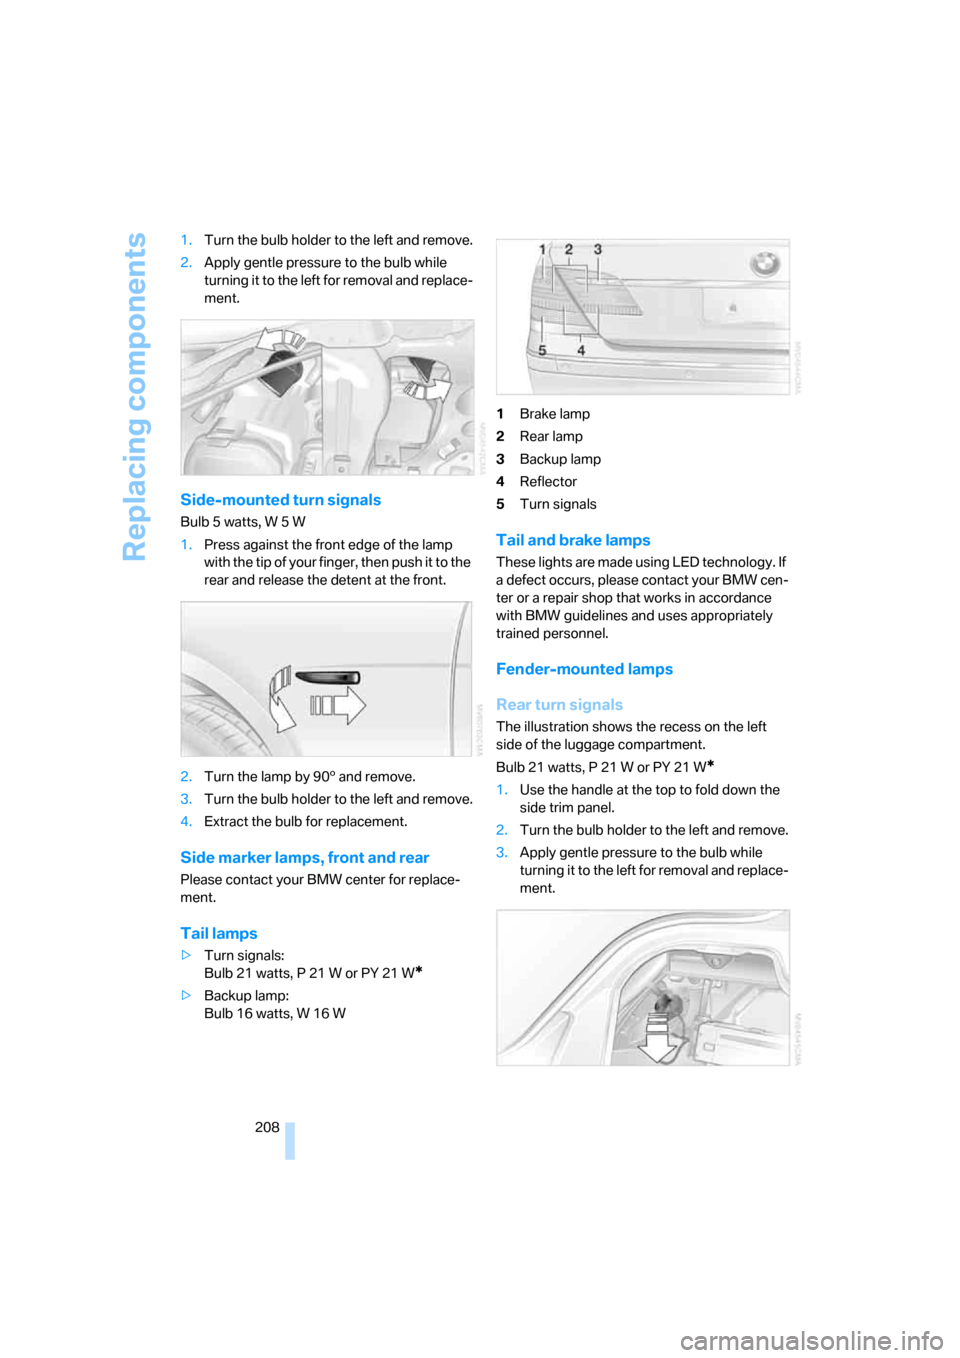 BMW 745i 2006 E65 Owners Manual Replacing components
208 1.Turn the bulb holder to the left and remove.
2.Apply gentle pressure to the bulb while 
turning it to the left for removal and replace-
ment.
Side-mounted turn signals
Bulb 